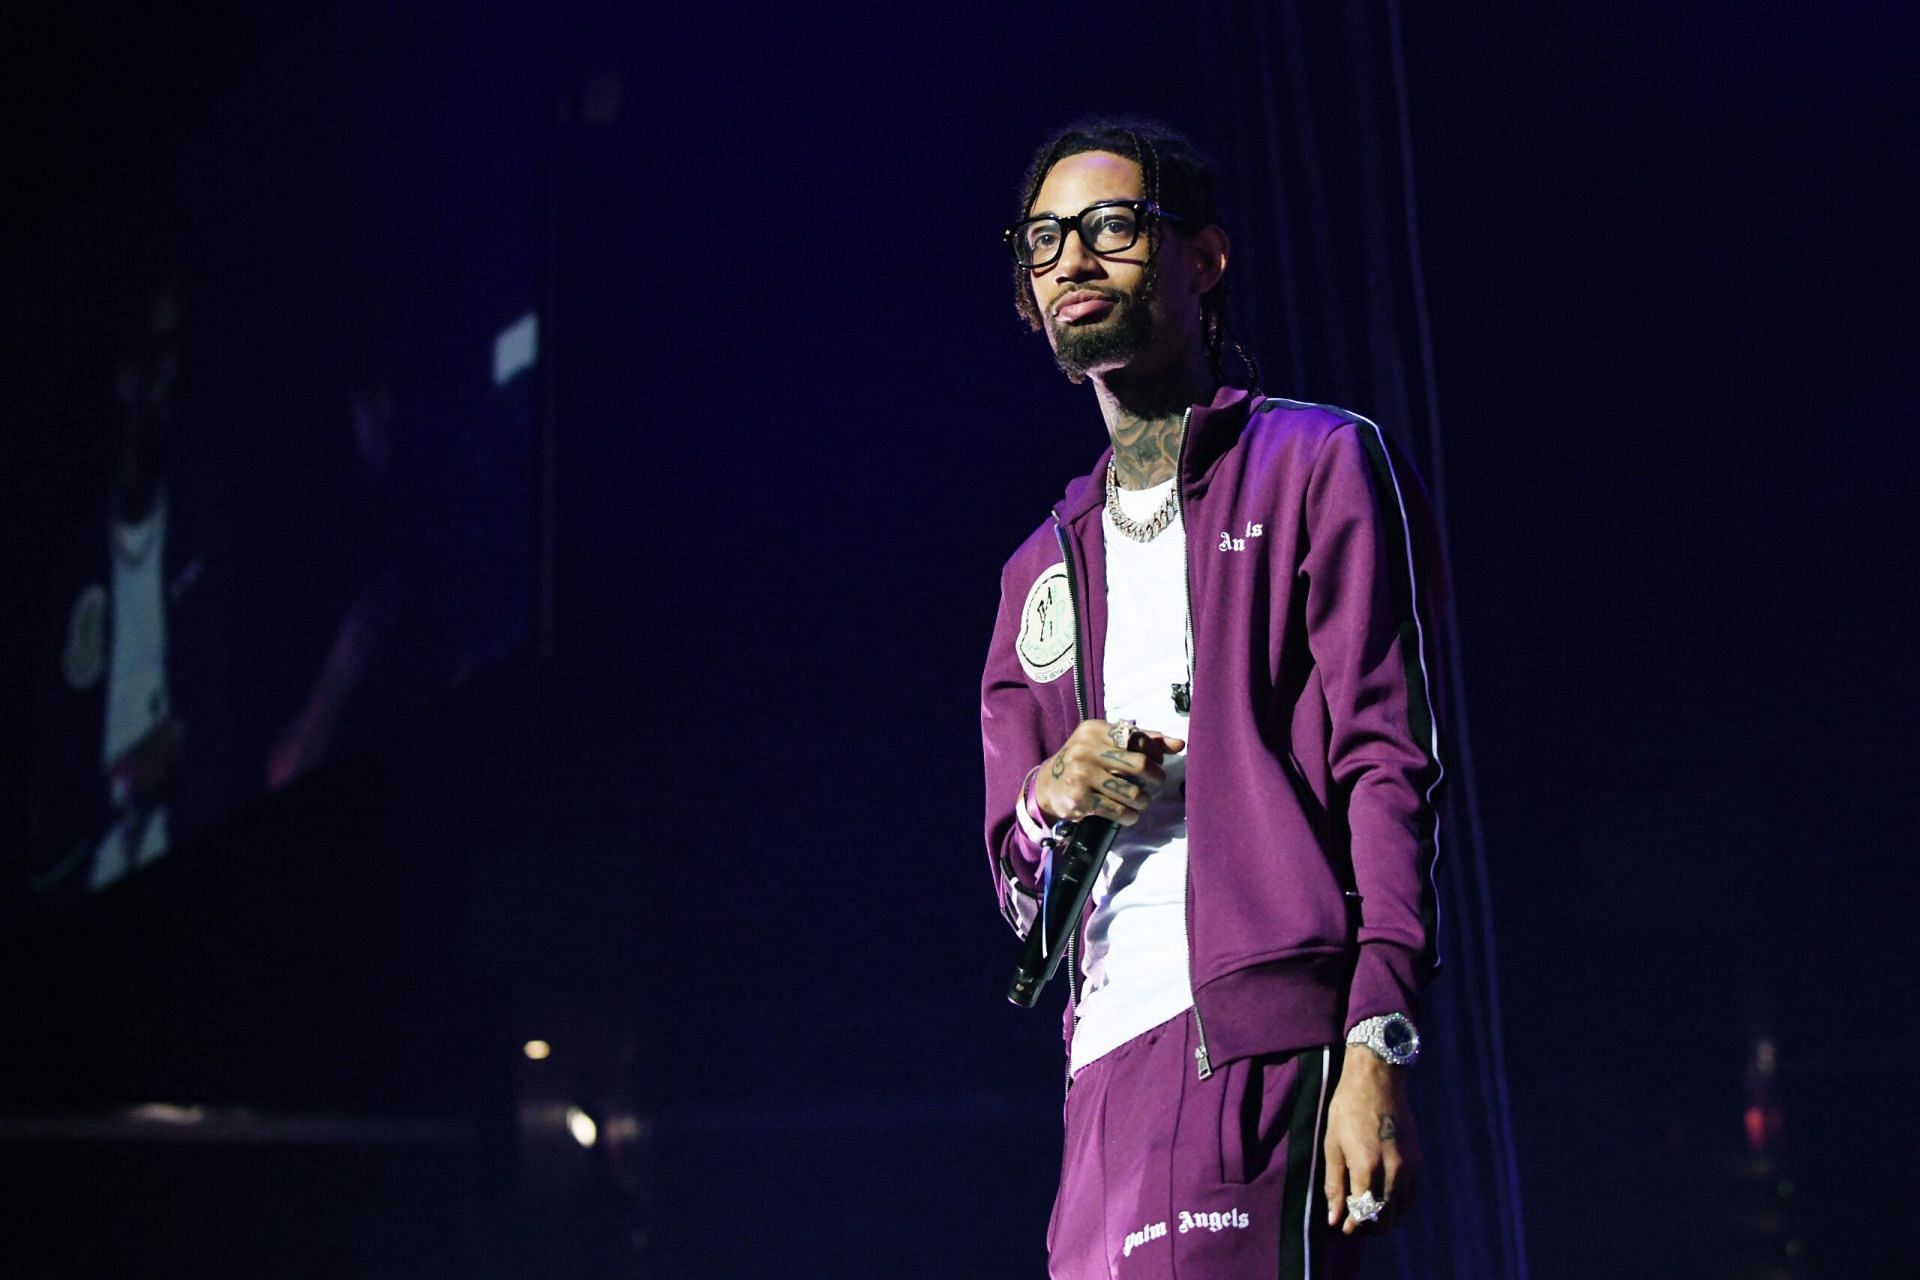 PnB Rock was shot and killed while dining at Roscoe